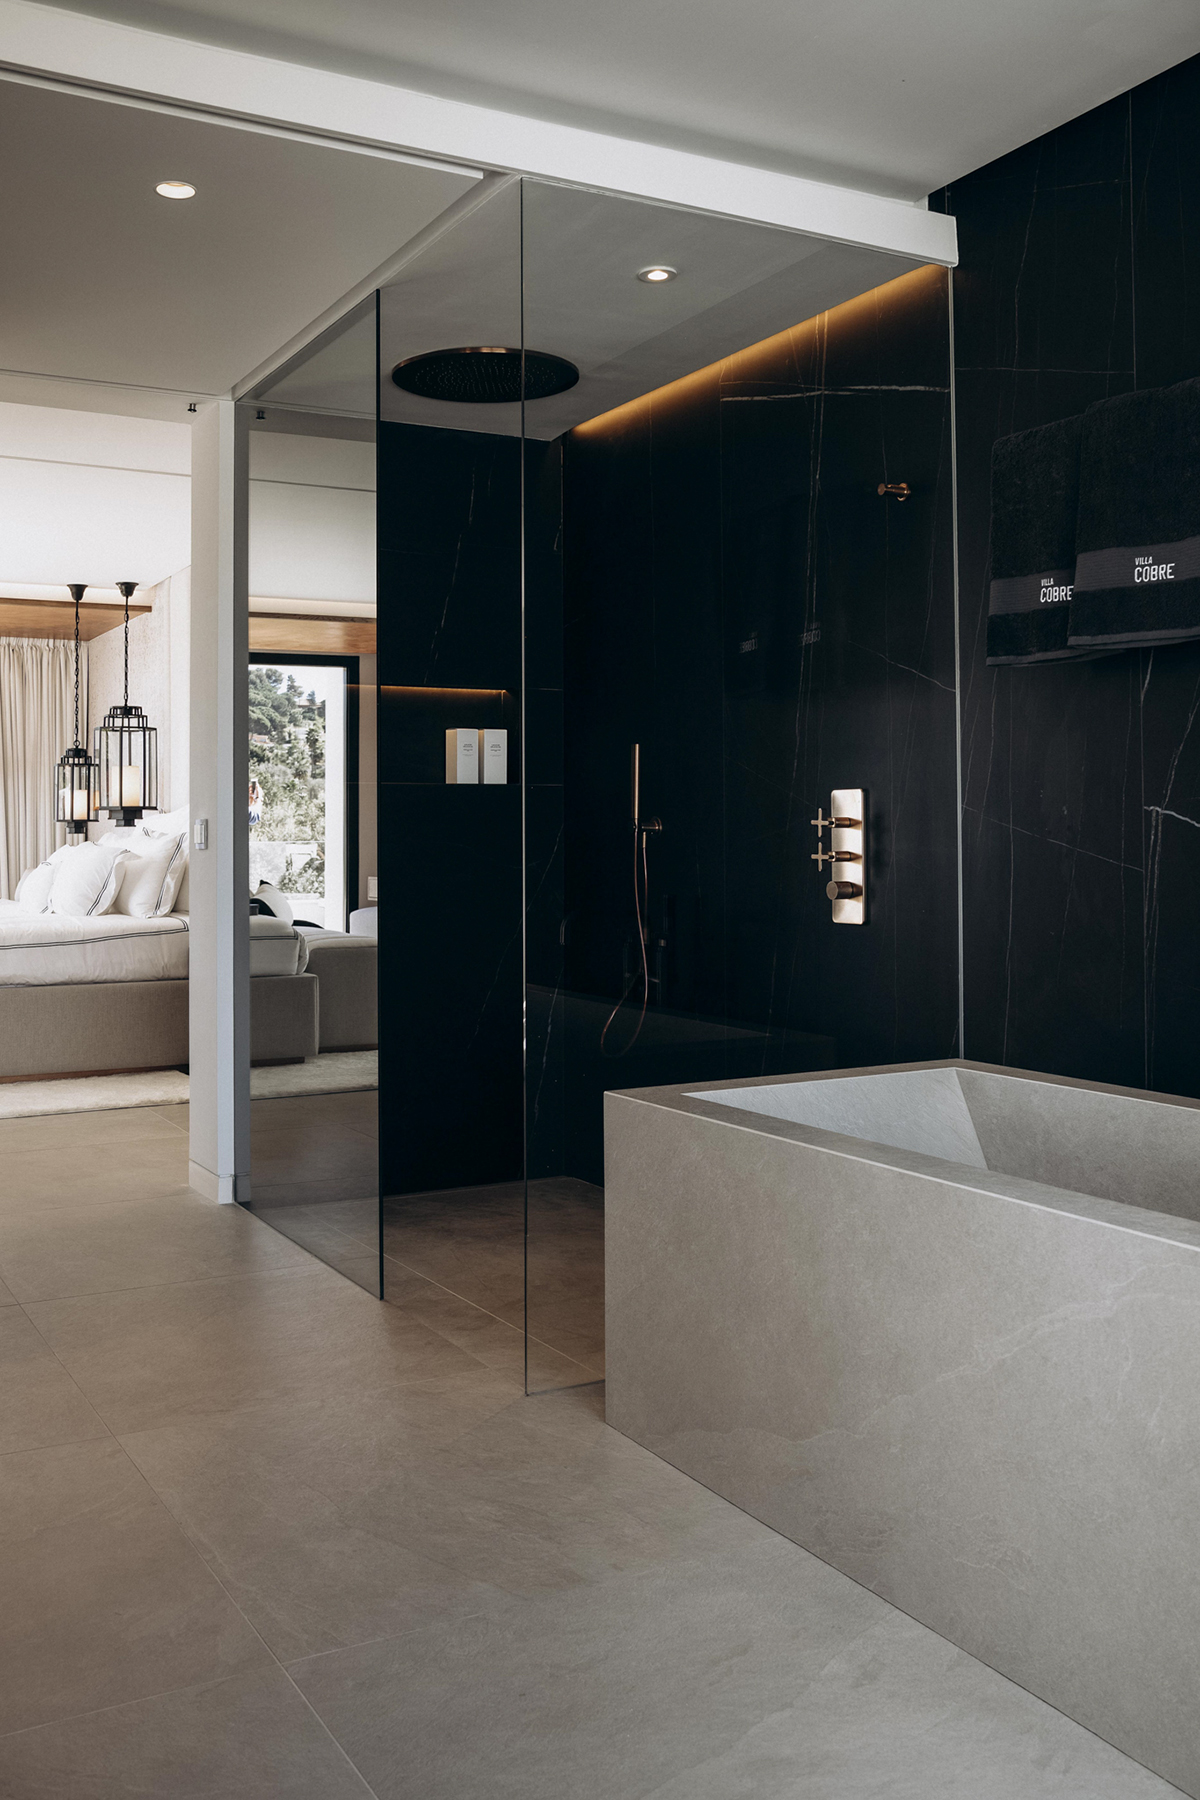 Omeo Design Interiors. Baths and Beyond.